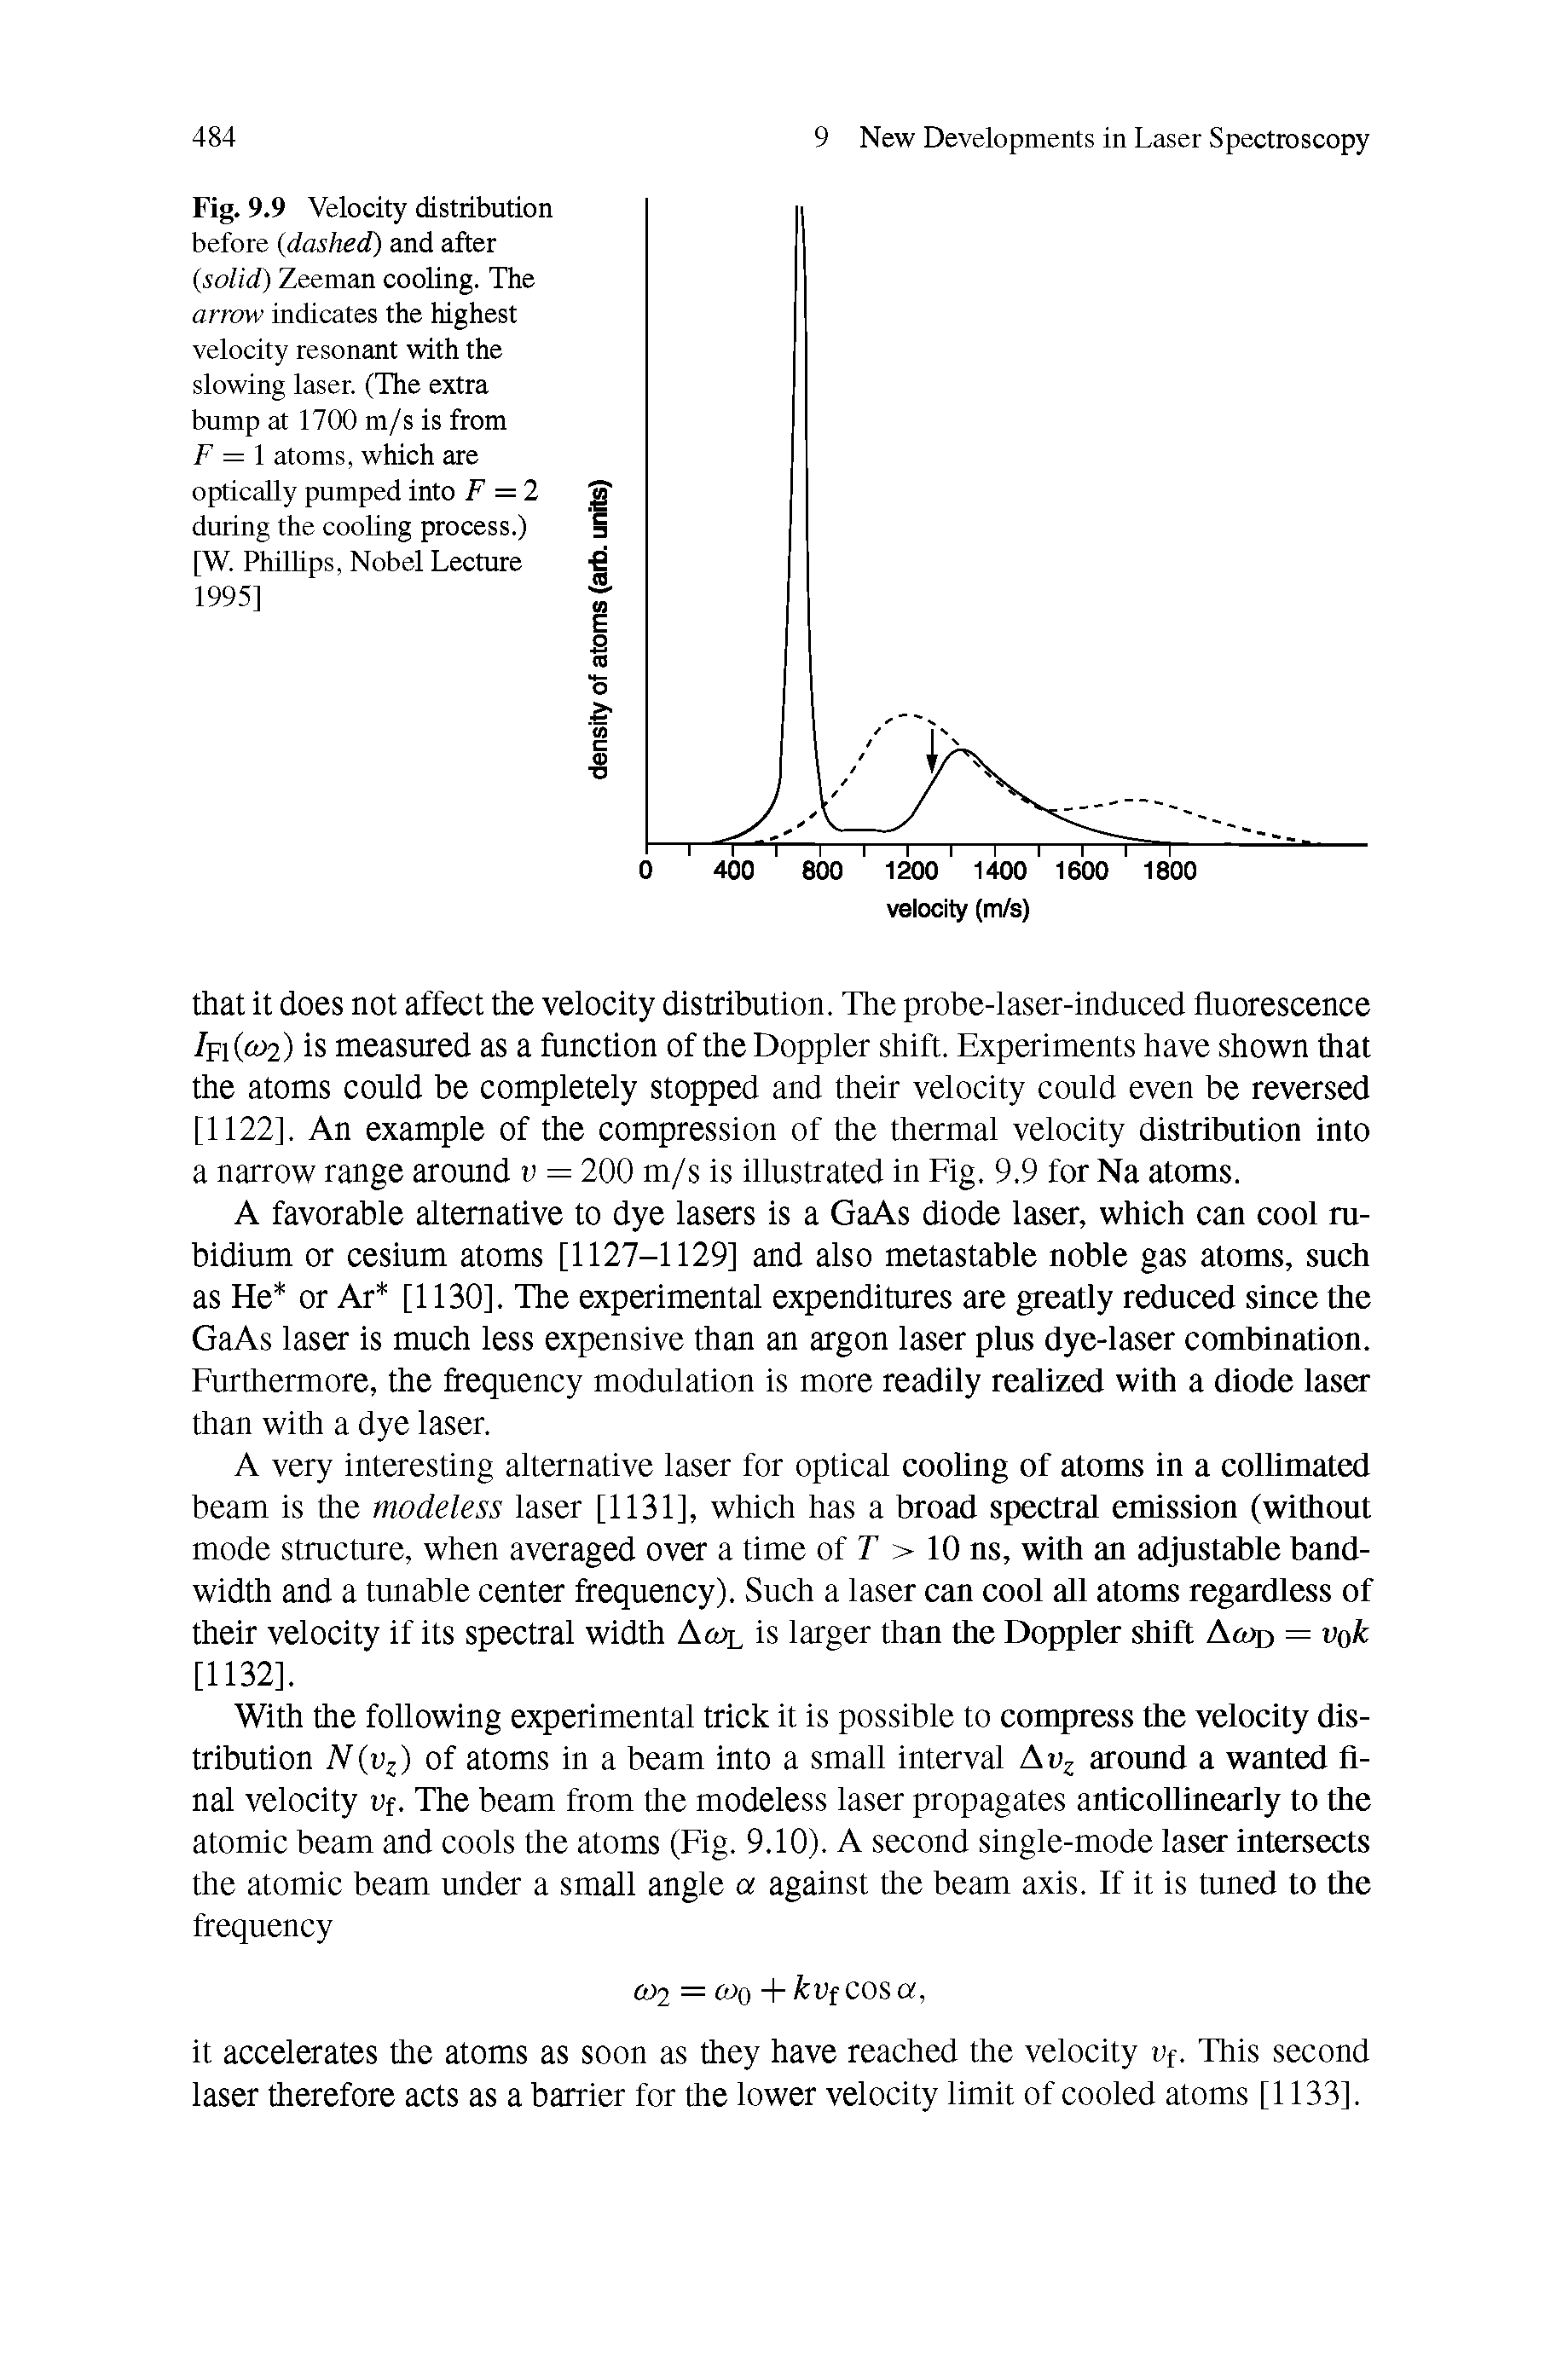 Fig. 9.9 Velocity distribution before dashed) and after solid) Zeeman cooling. The arrow indicates the highest velocity resonant with the slowing laser. (The extra bump at 1700 m/s is from F = atoms, which are optically pumped into F = 2 during the cooling process.) [W. PhUlips, Nobel Lecture 1995]...